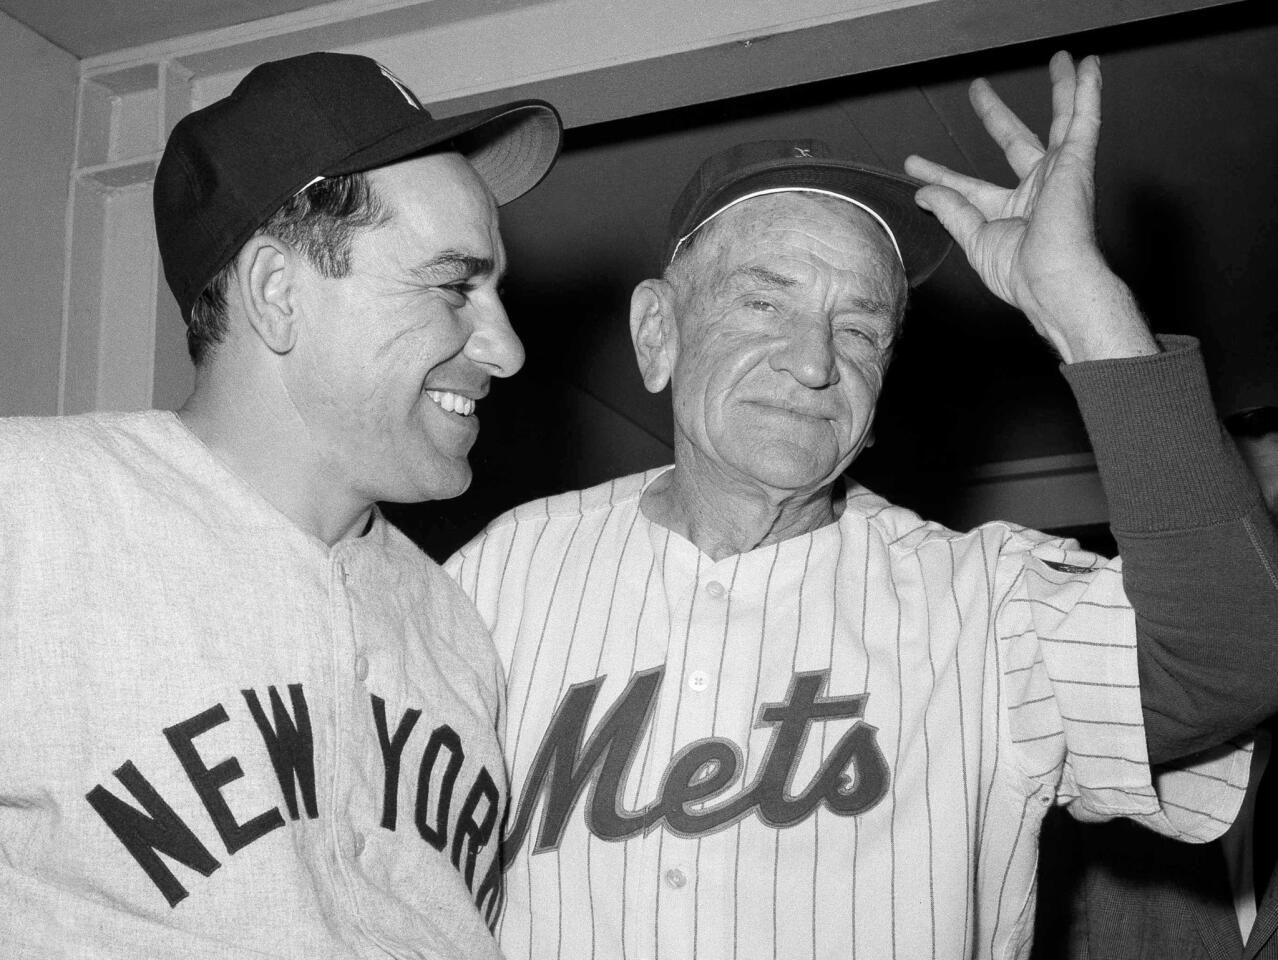 Remembering Yogi Berra, baseball great on and off the field